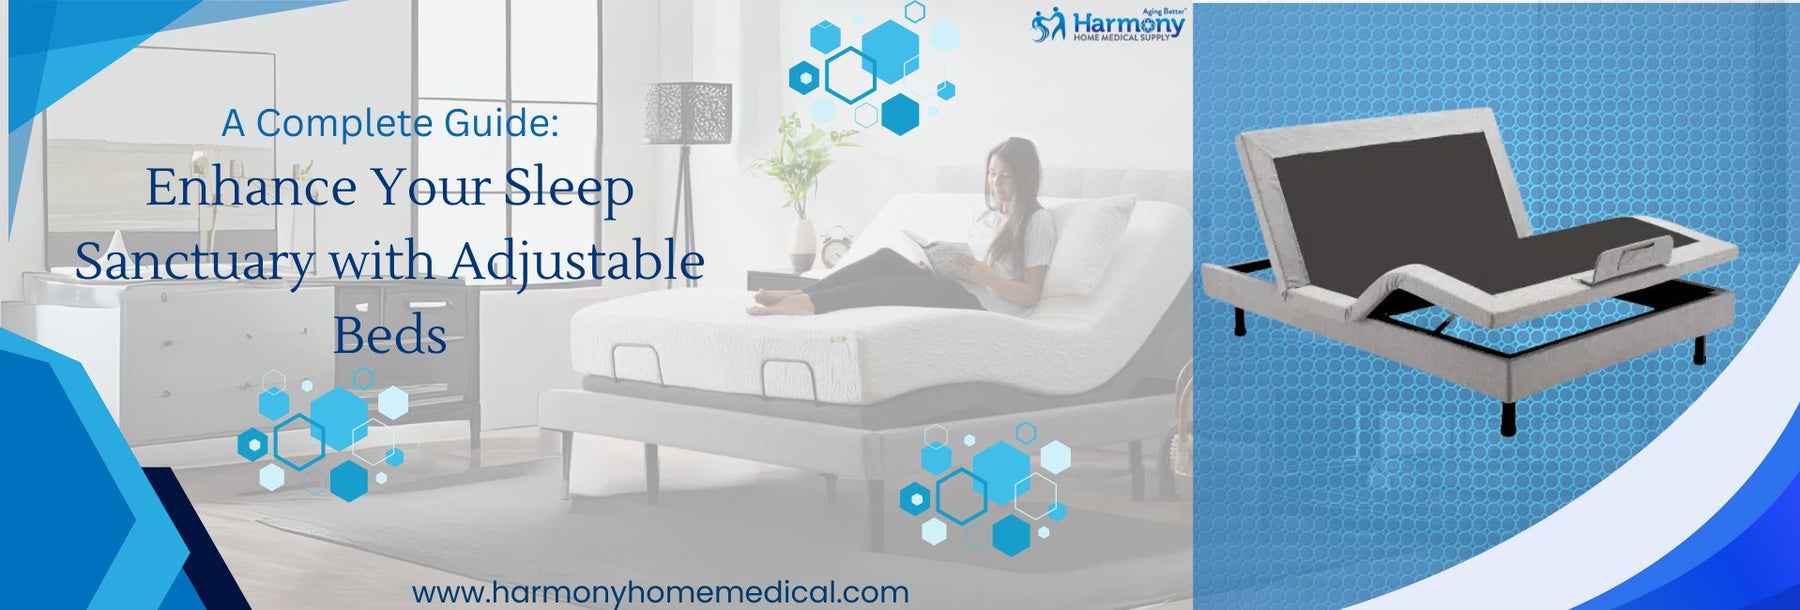 How do Adjustable Beds Work?| A Complete Guide - Harmony Home Medical Supply